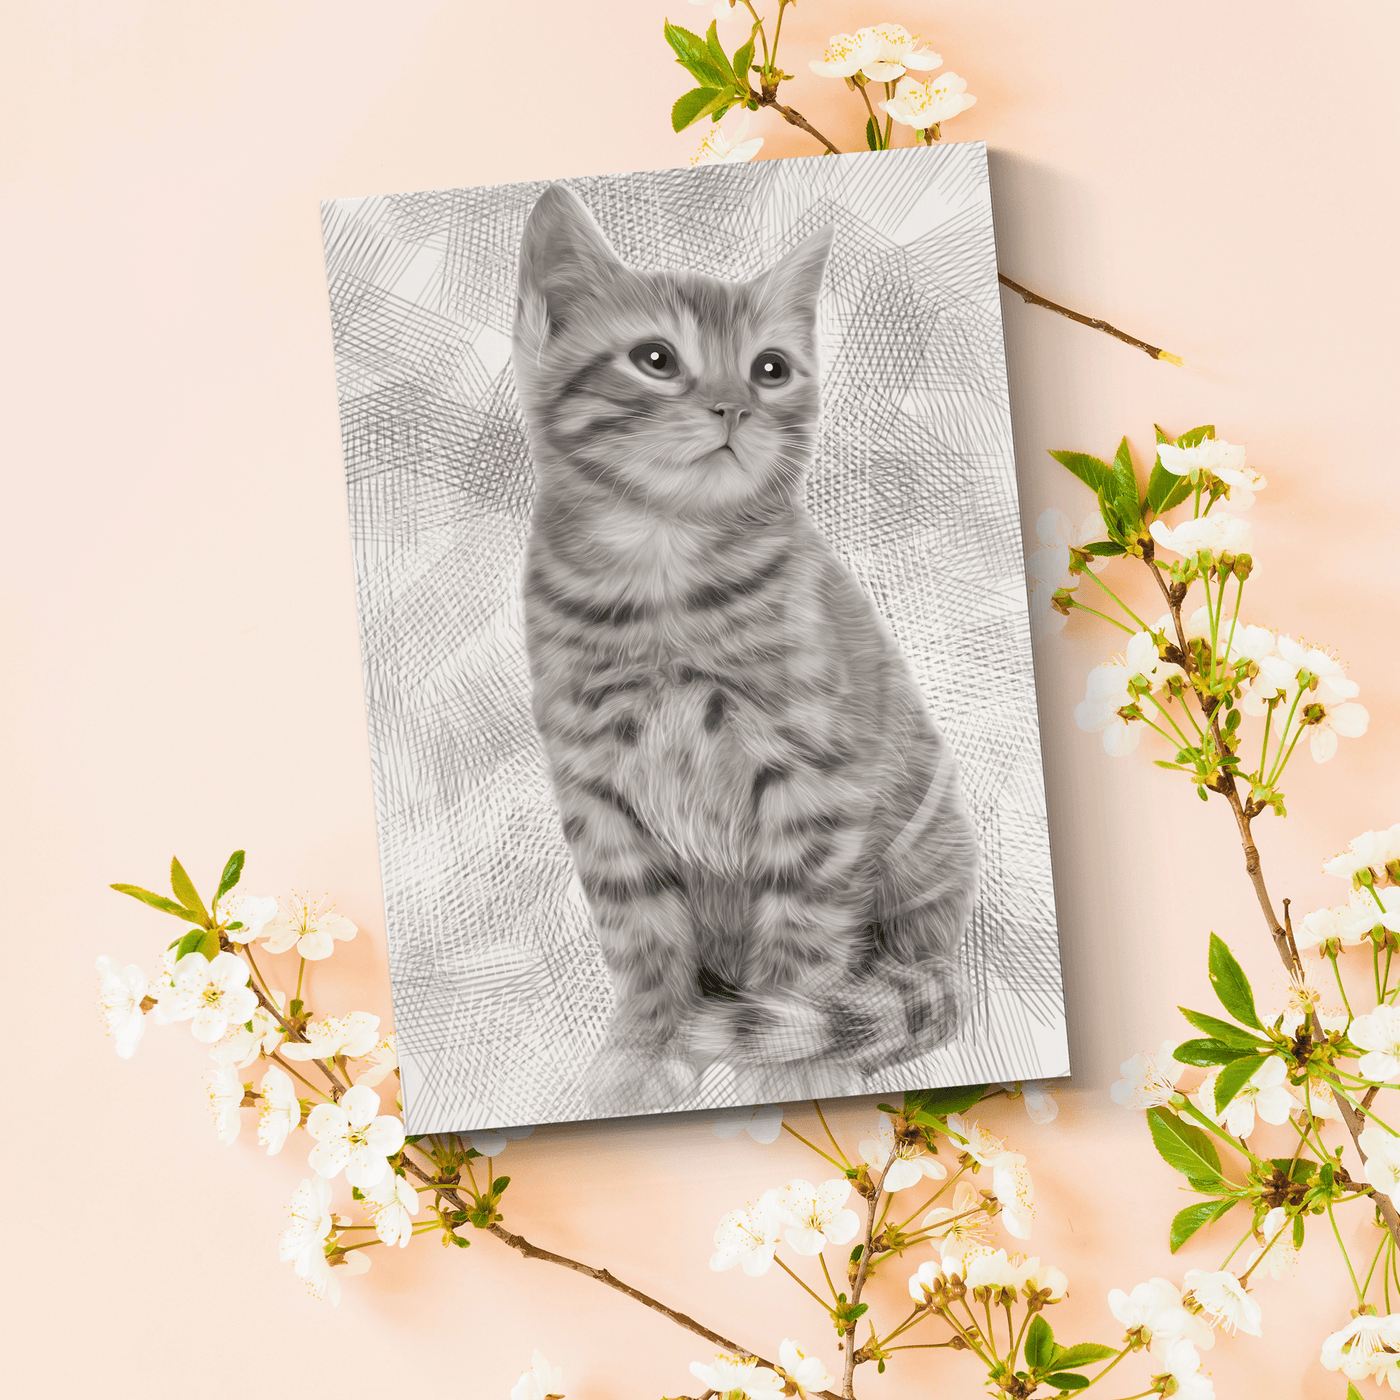 pet charcoal drawing of an adorable cat